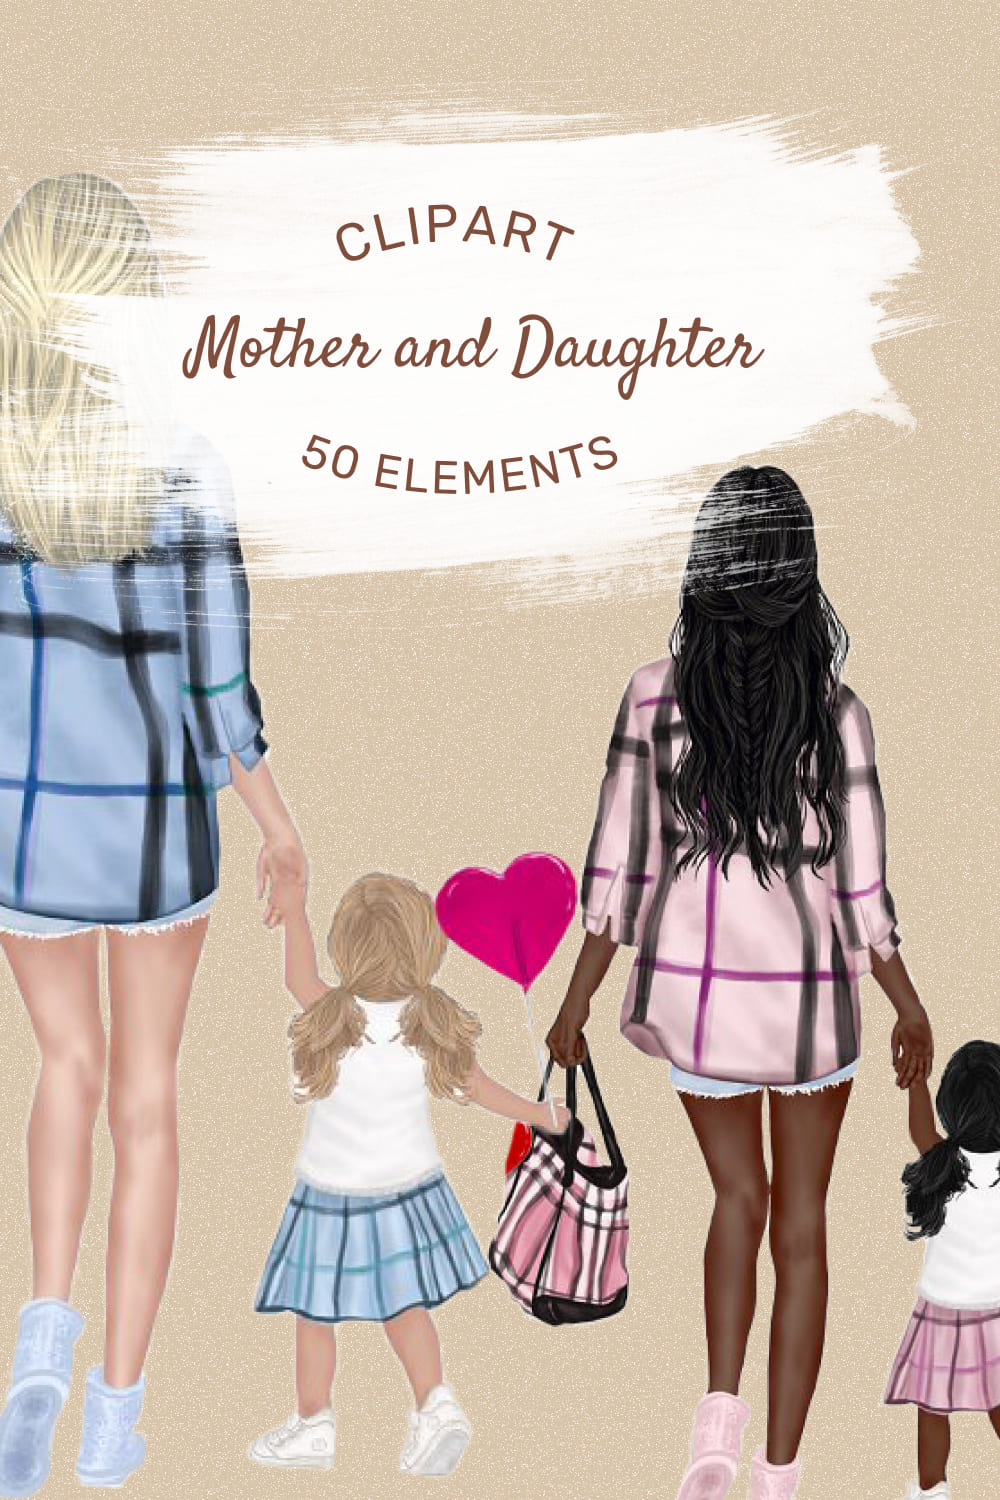 Mother And Daughter Clipart - Pinterest.